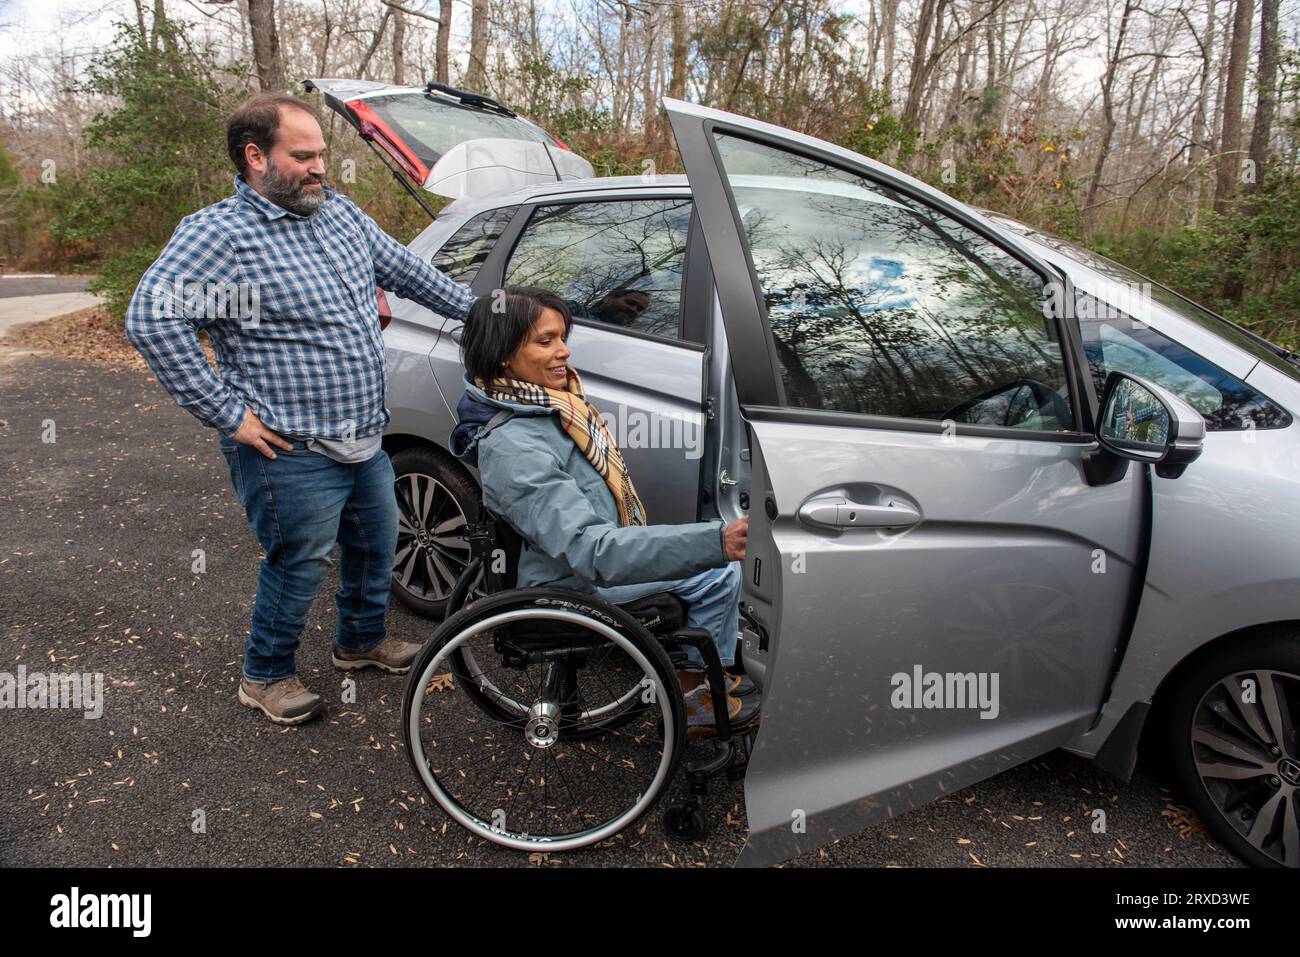 An outdoorsy couplearrives at a handicapped accessible campsite. The woman is moving from the car to her wheelchair. Both are disabled but love the ou Stock Photo